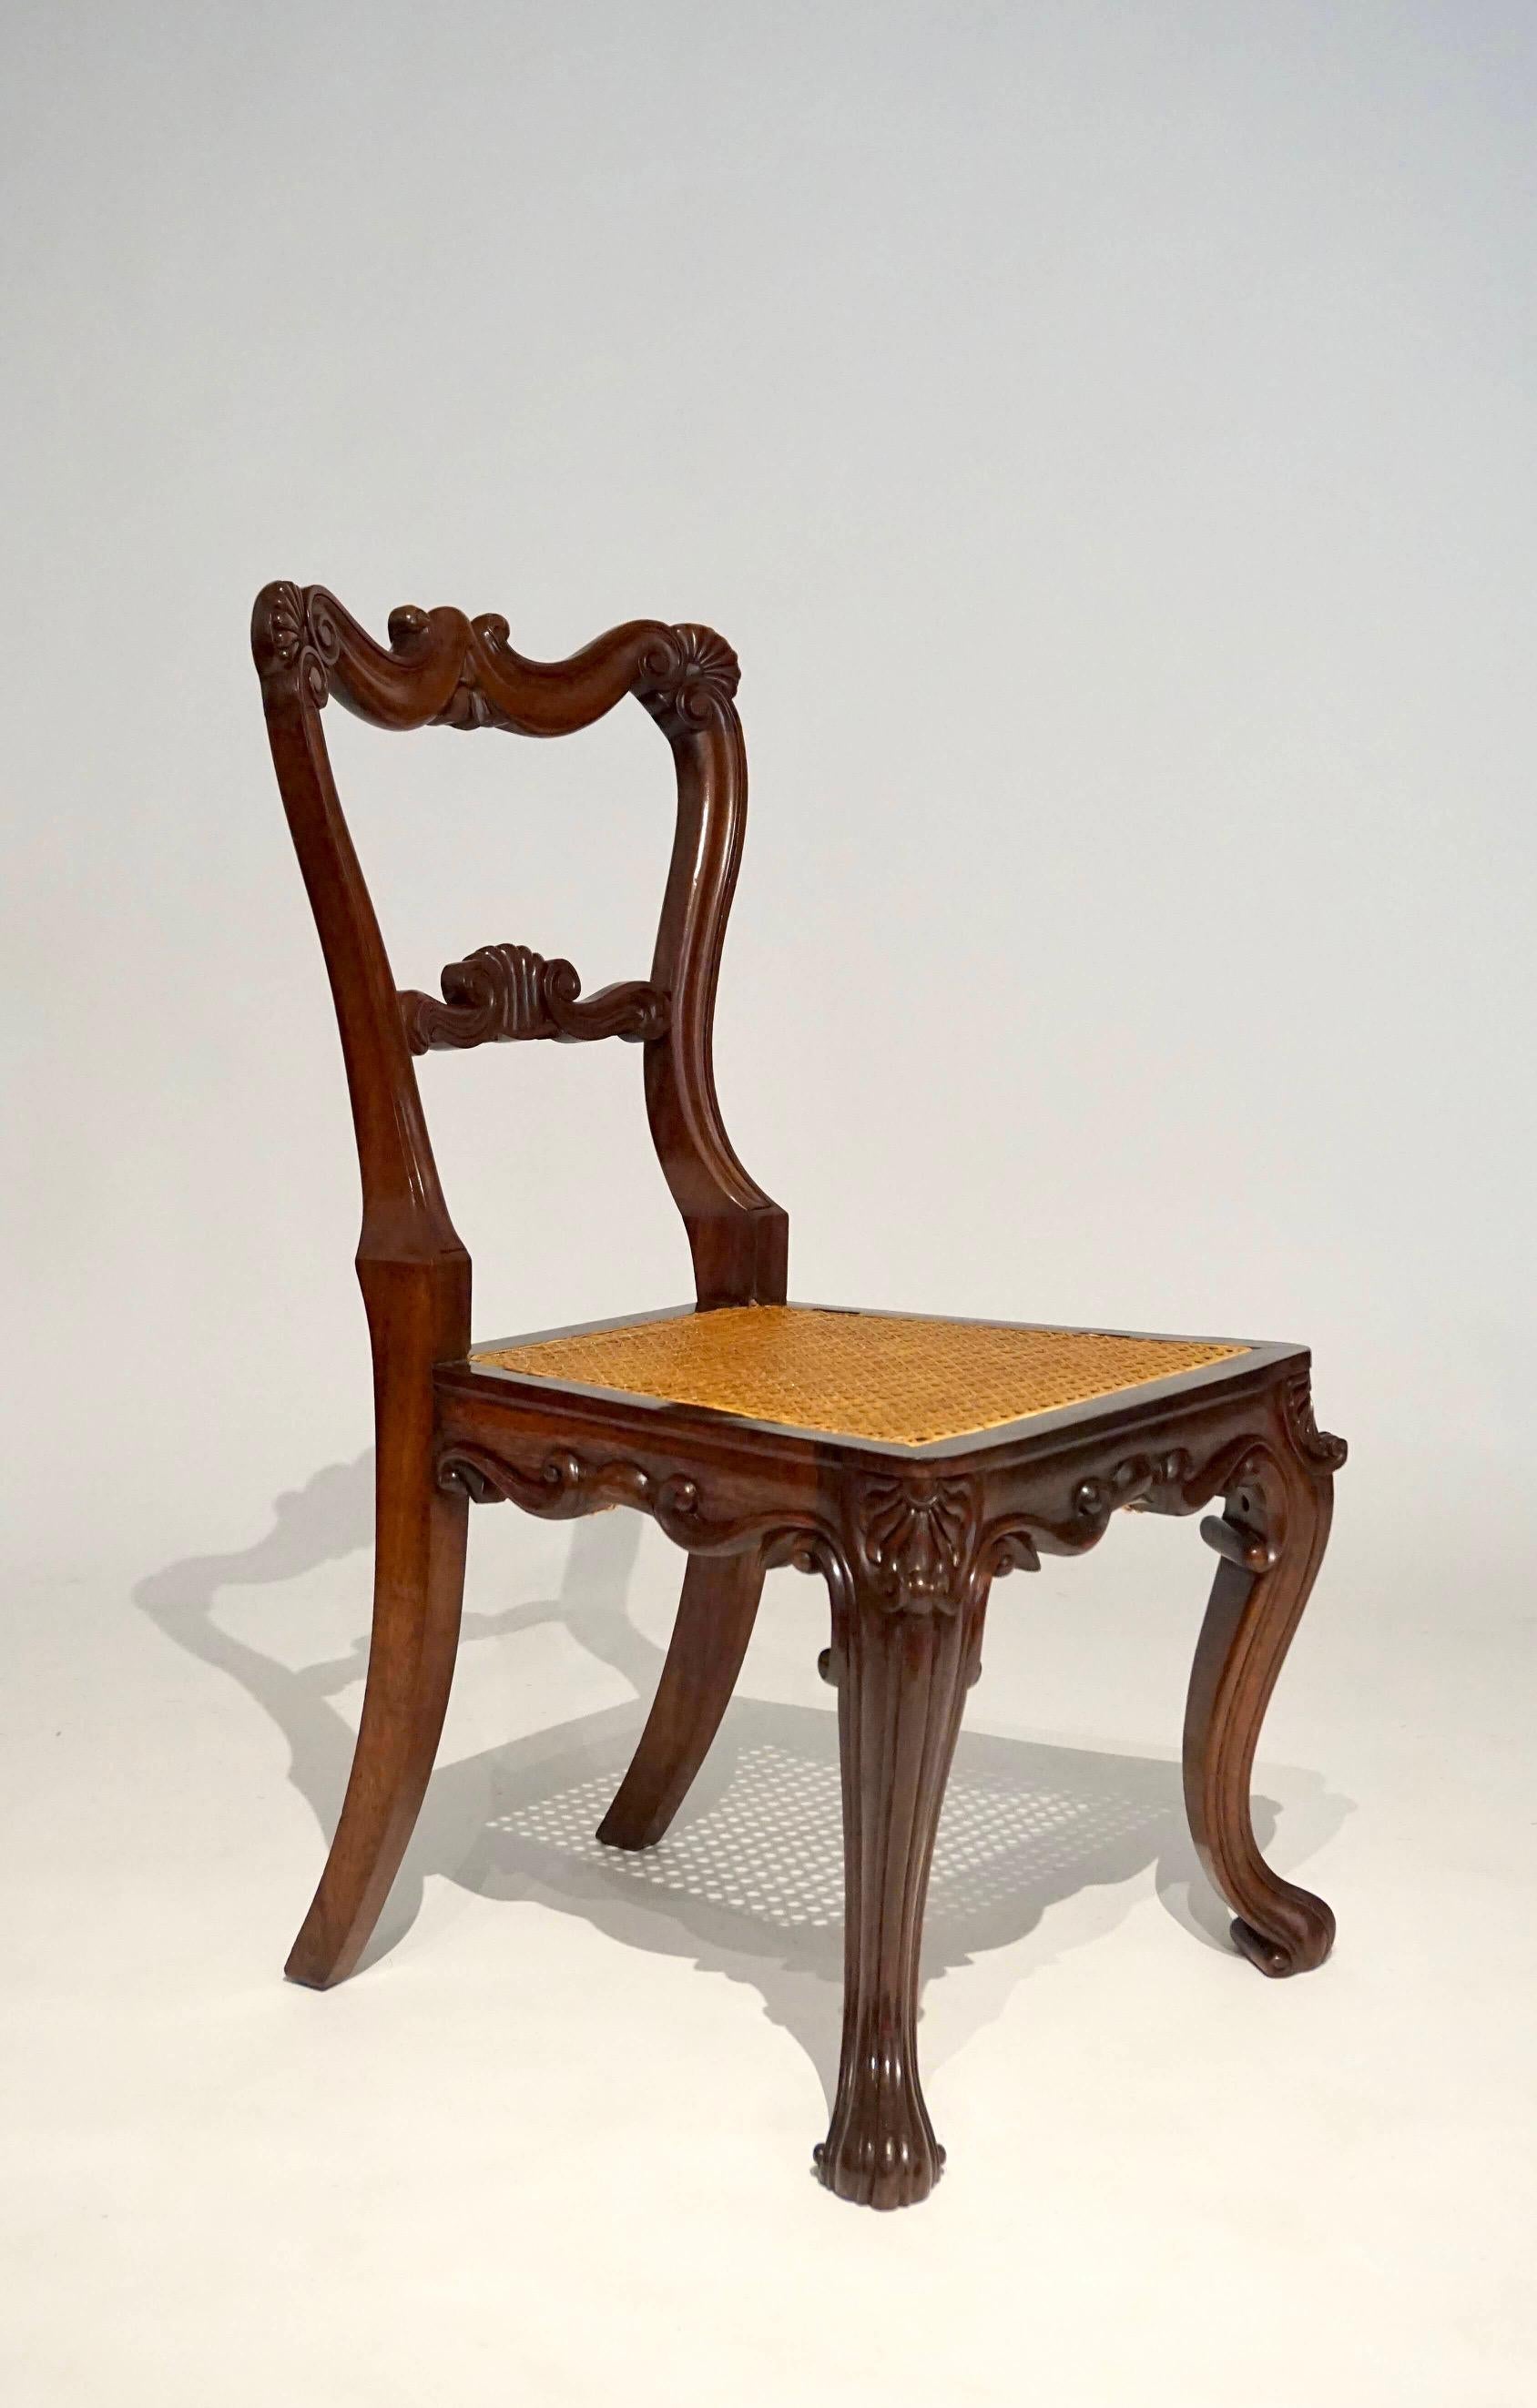 19th Century Gillows of Lancaster Regency Rococo Revival Rosewood Side Chairs, circa 1825 For Sale